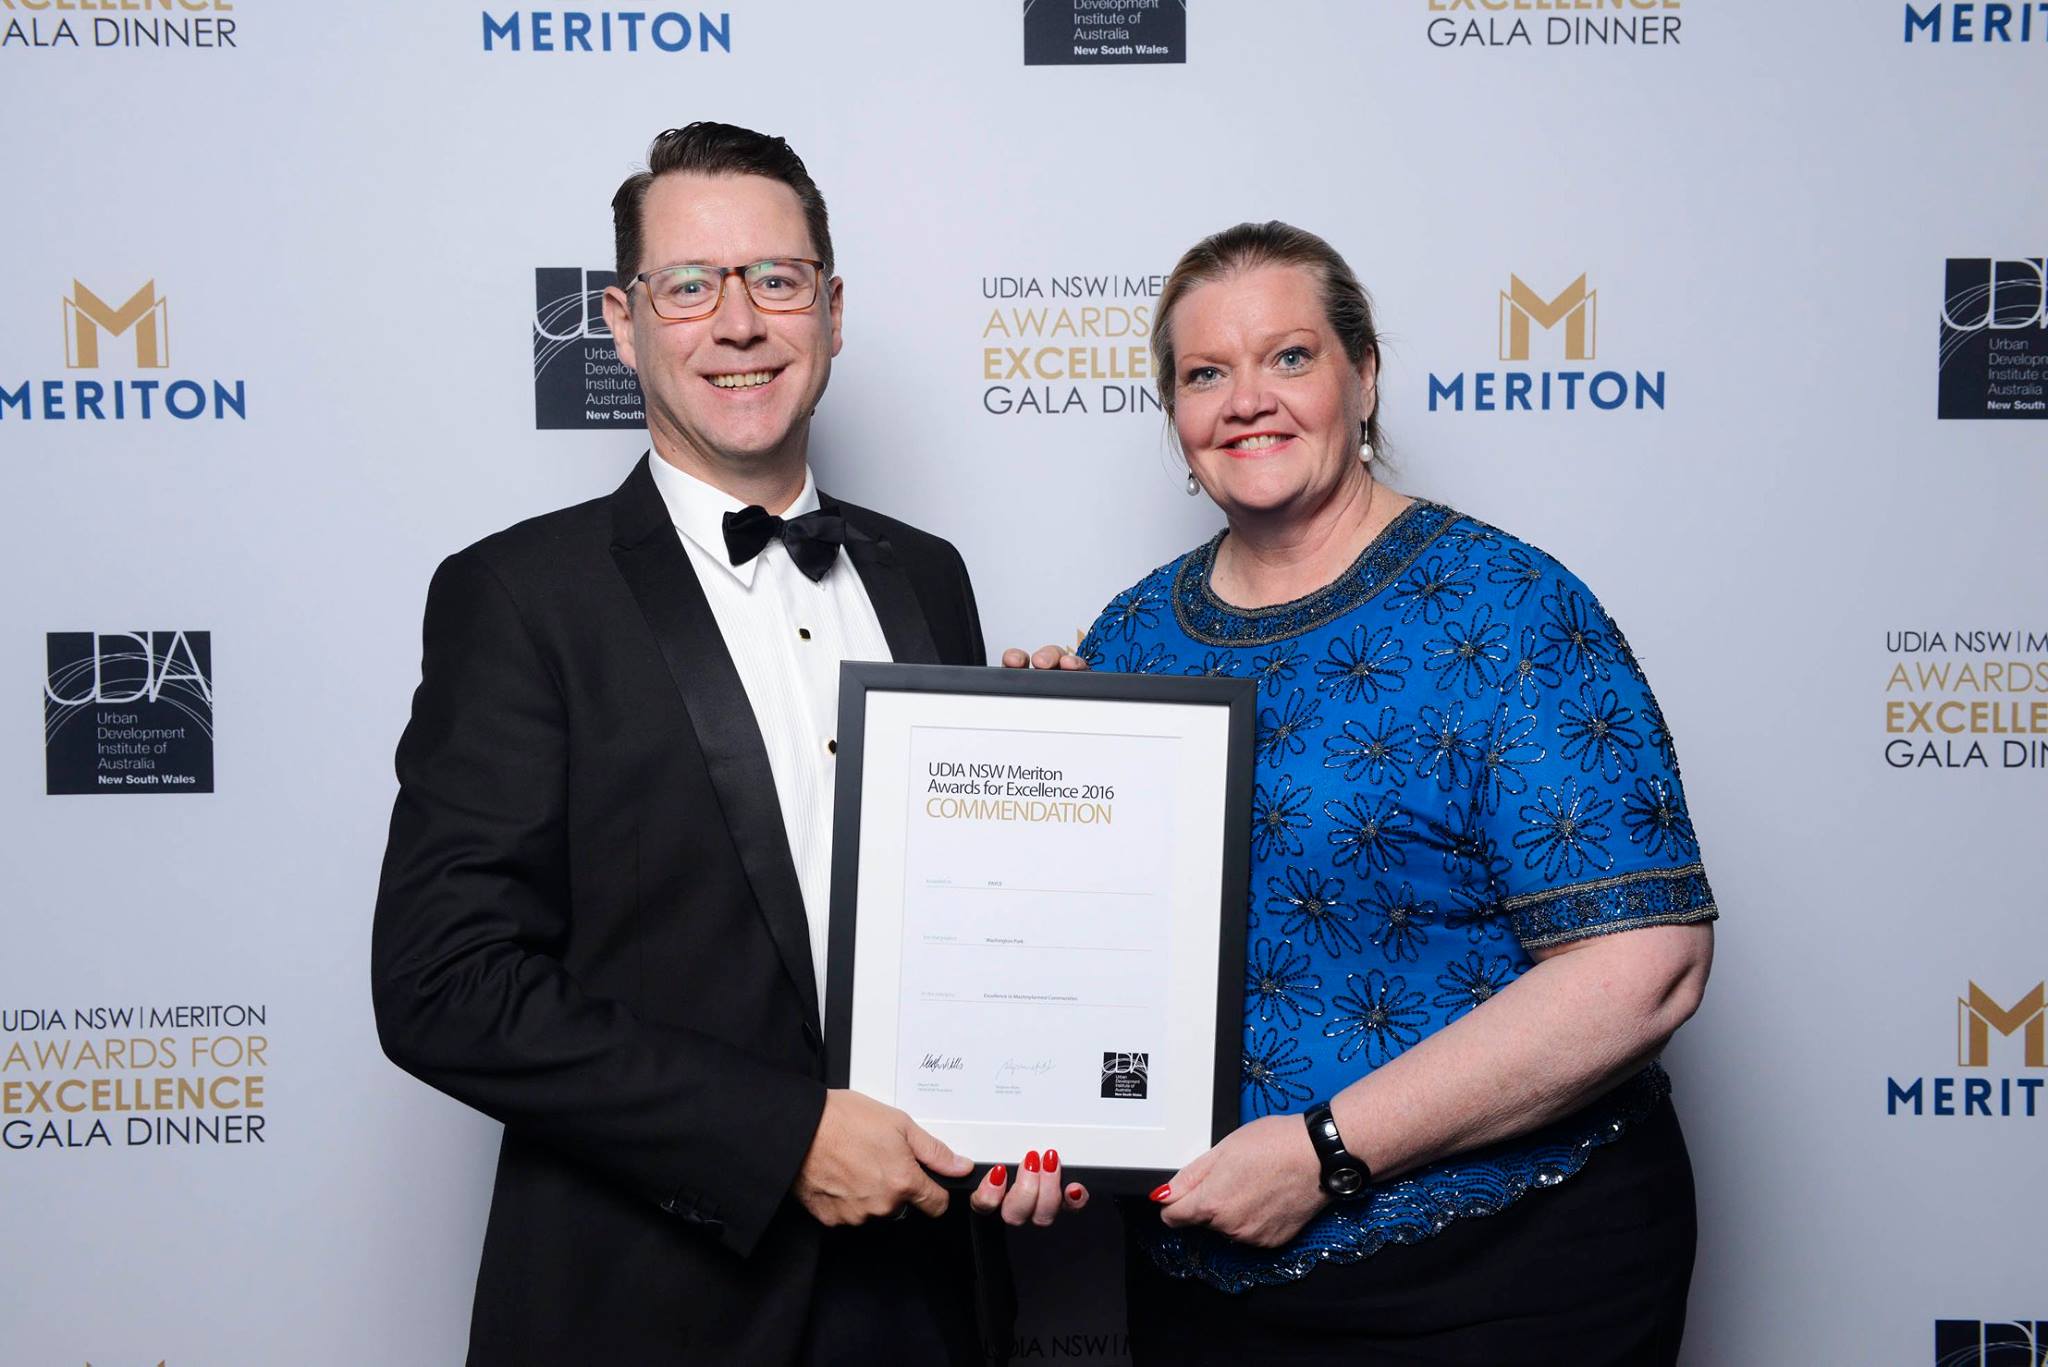 Washington Park awarded Commendation at UDIA NSW Awards for Excellence